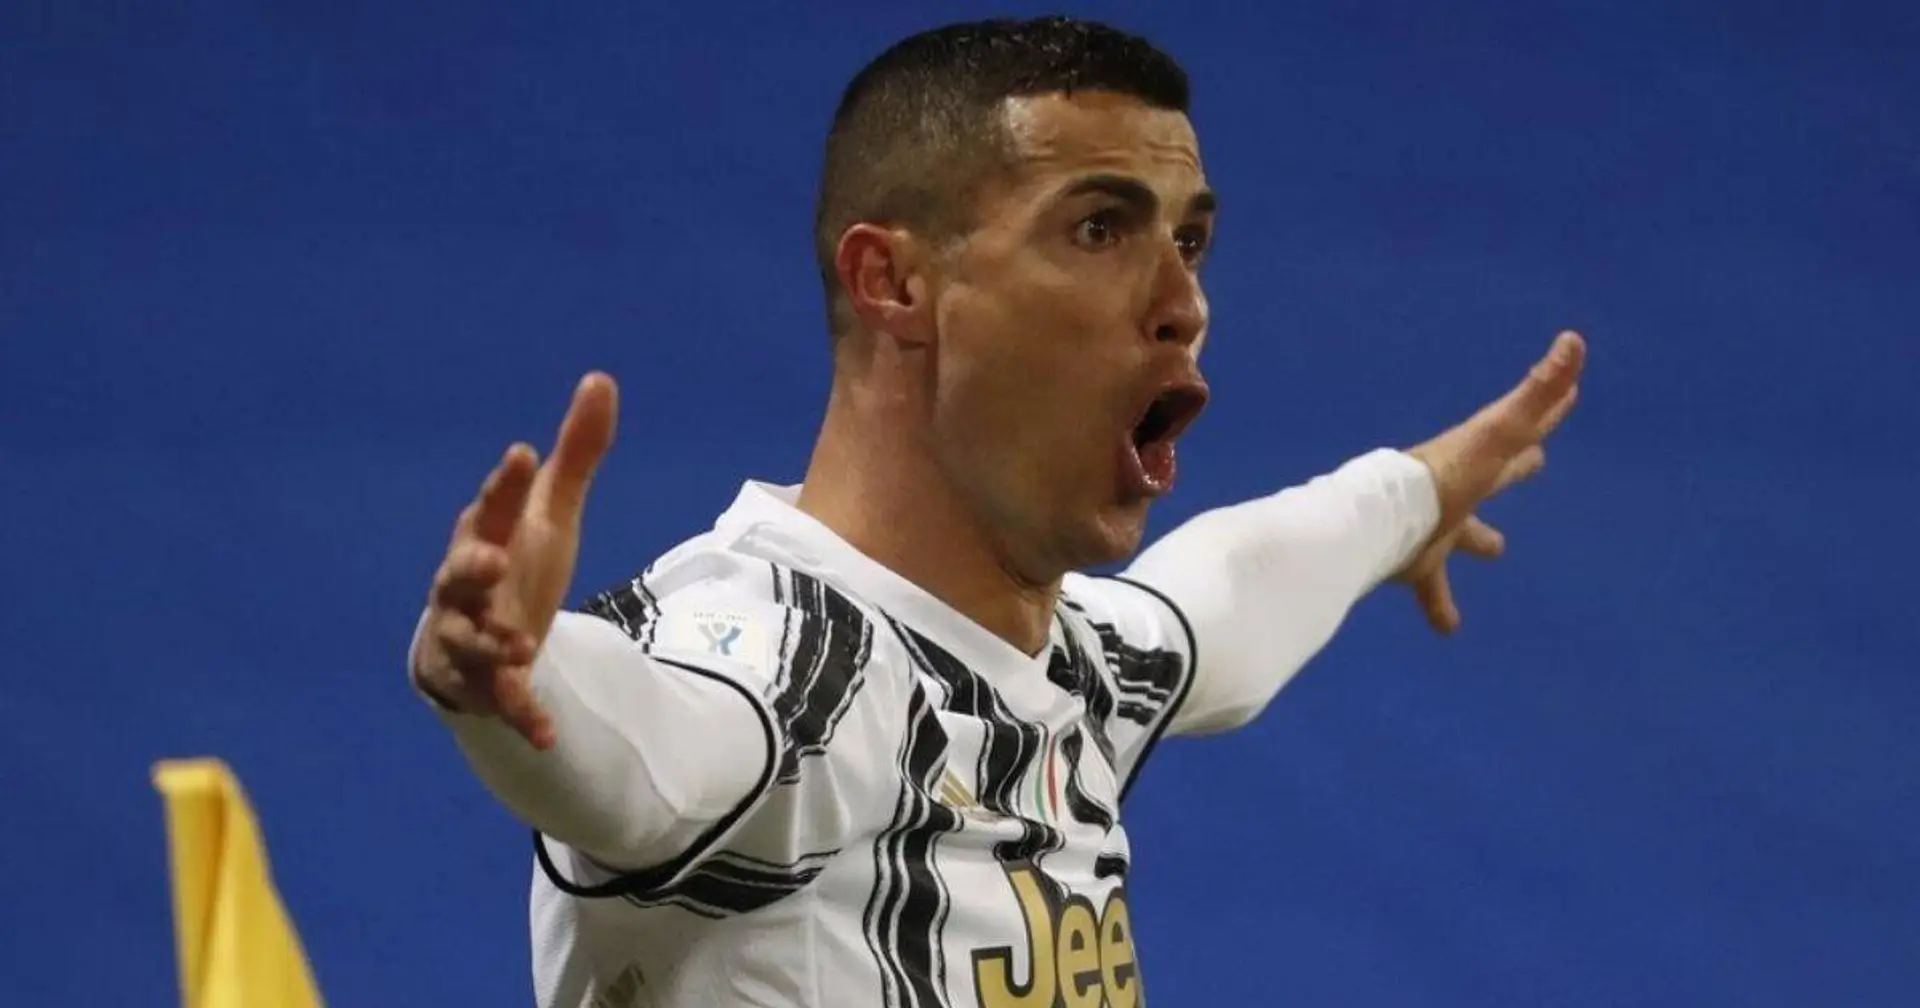 Ronaldo becomes the all-time highest goalscorer in football history